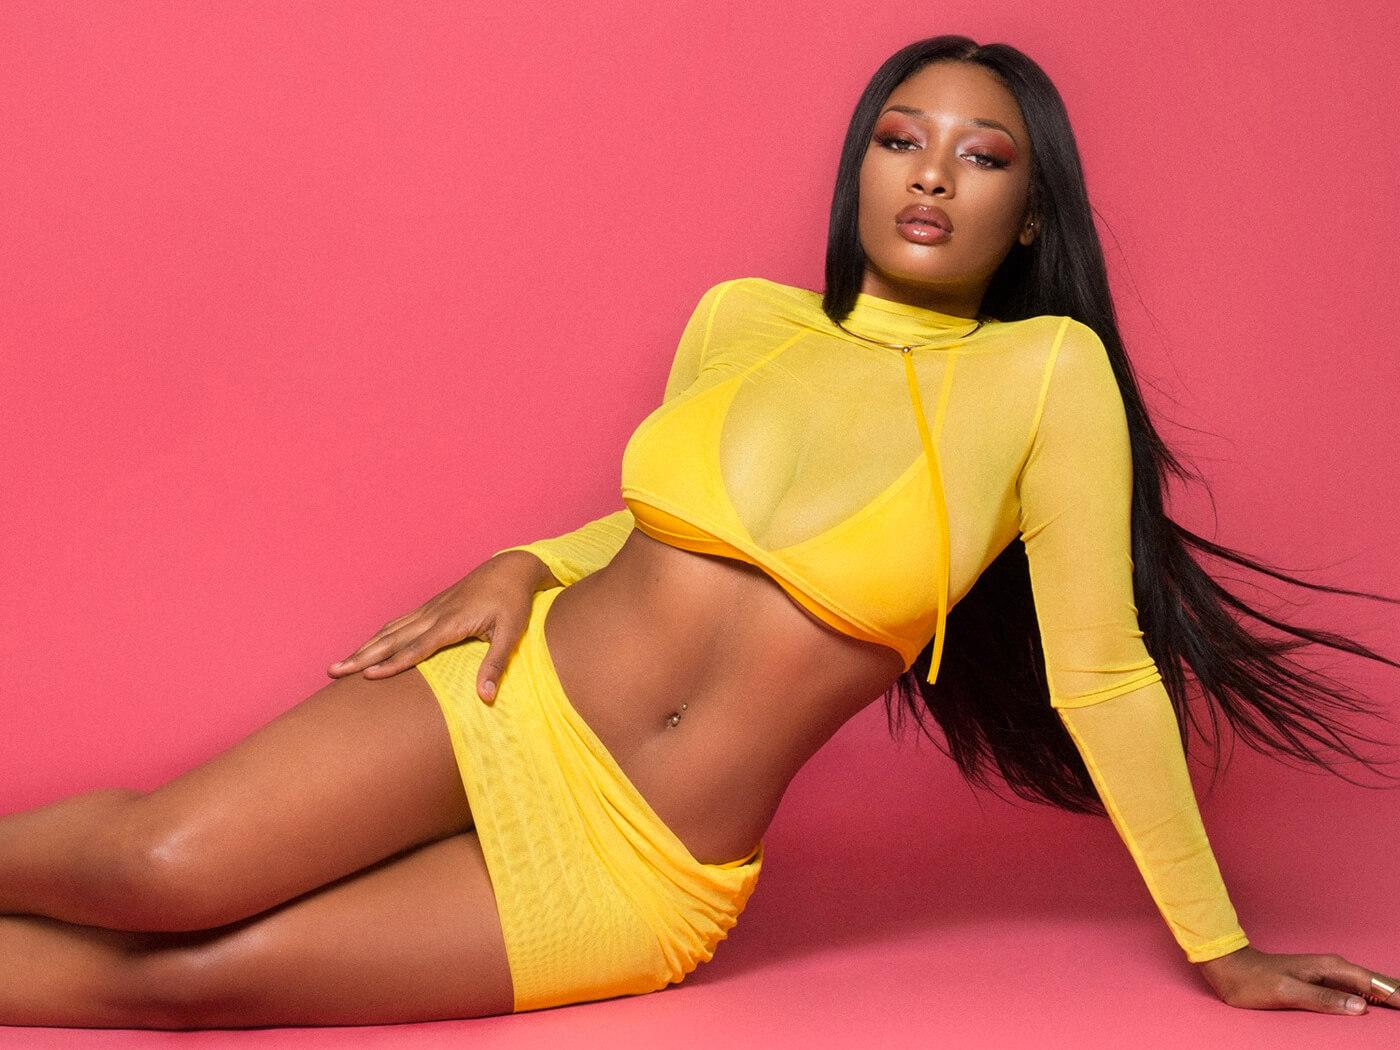 Download wallpapers megan thee stallion for desktop free High Quality HD  pictures wallpapers  Page 1